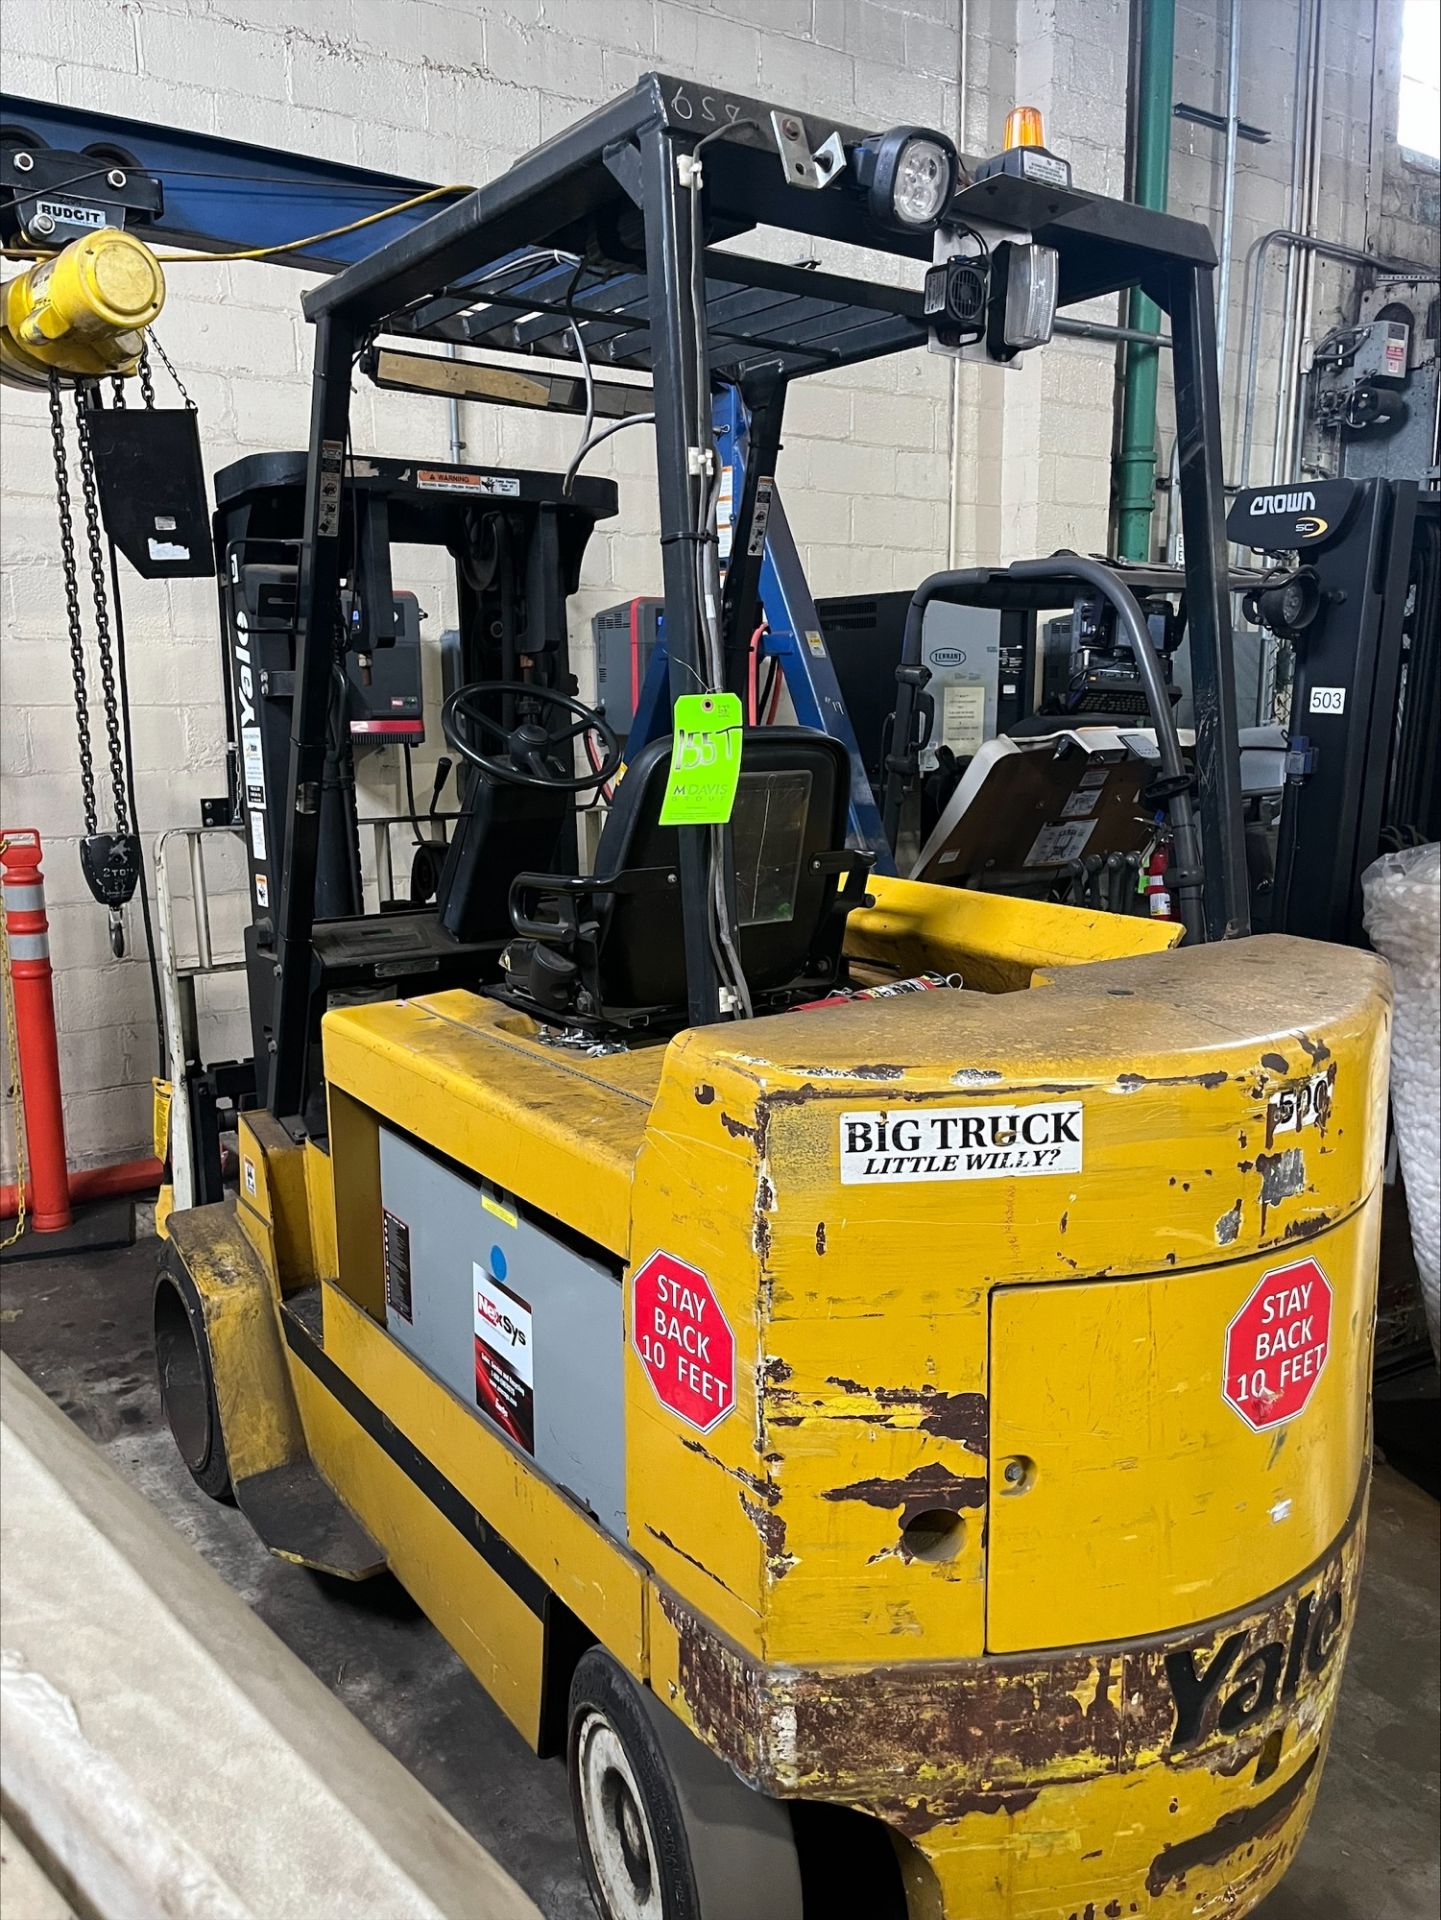 YALE LIFT TRUCK MODEL ERC100HGN36TE084 SERIAL NUMBER:A839NO2221A SALES ORDER 682137 MAXIMUM CAPACITY - Image 5 of 7